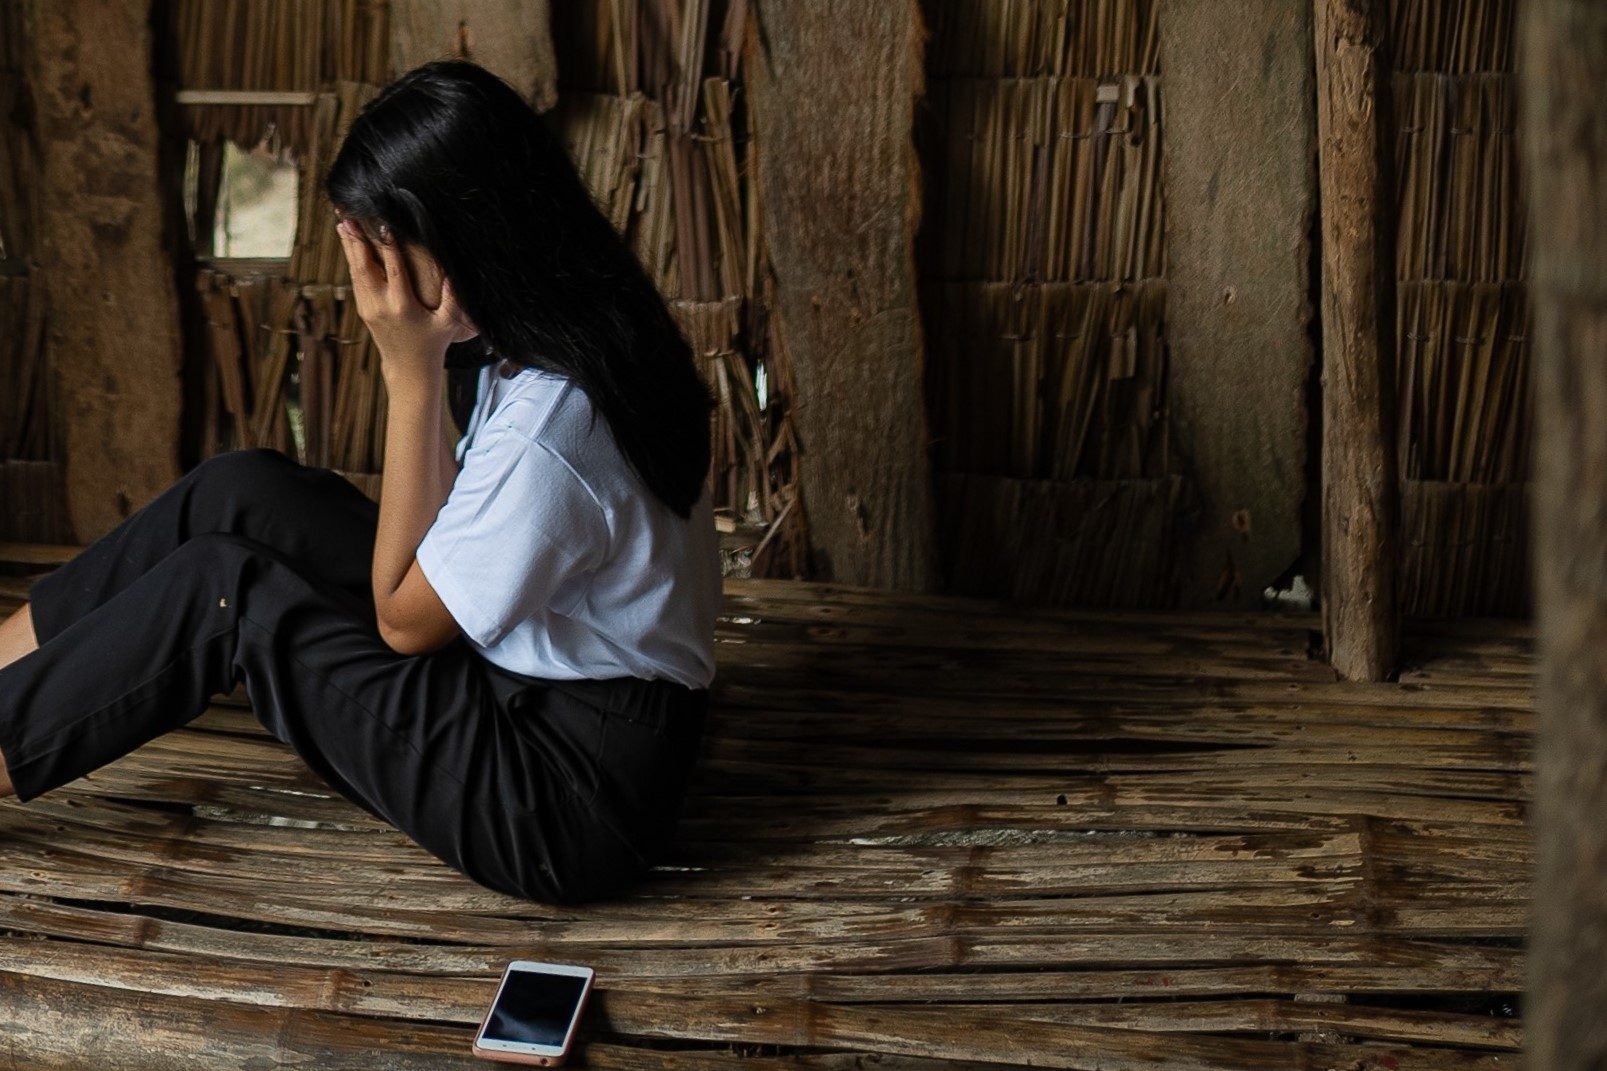 A young woman looks distressed as she sits beside her phone.